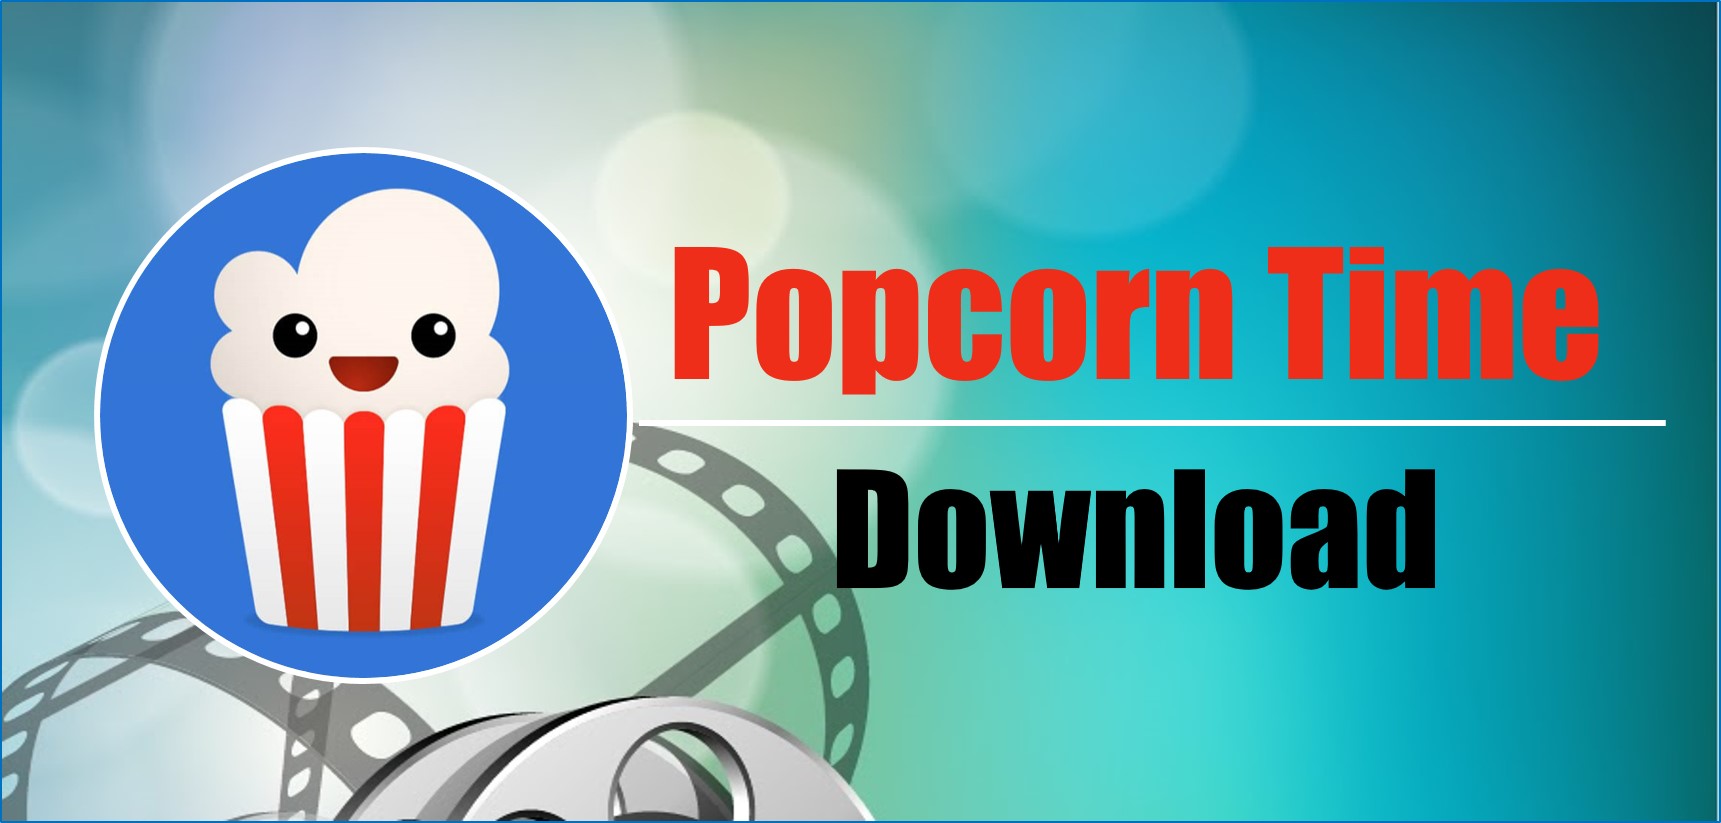 Download popcorn time for windows including windows 10/xp/7/8/8. 1.